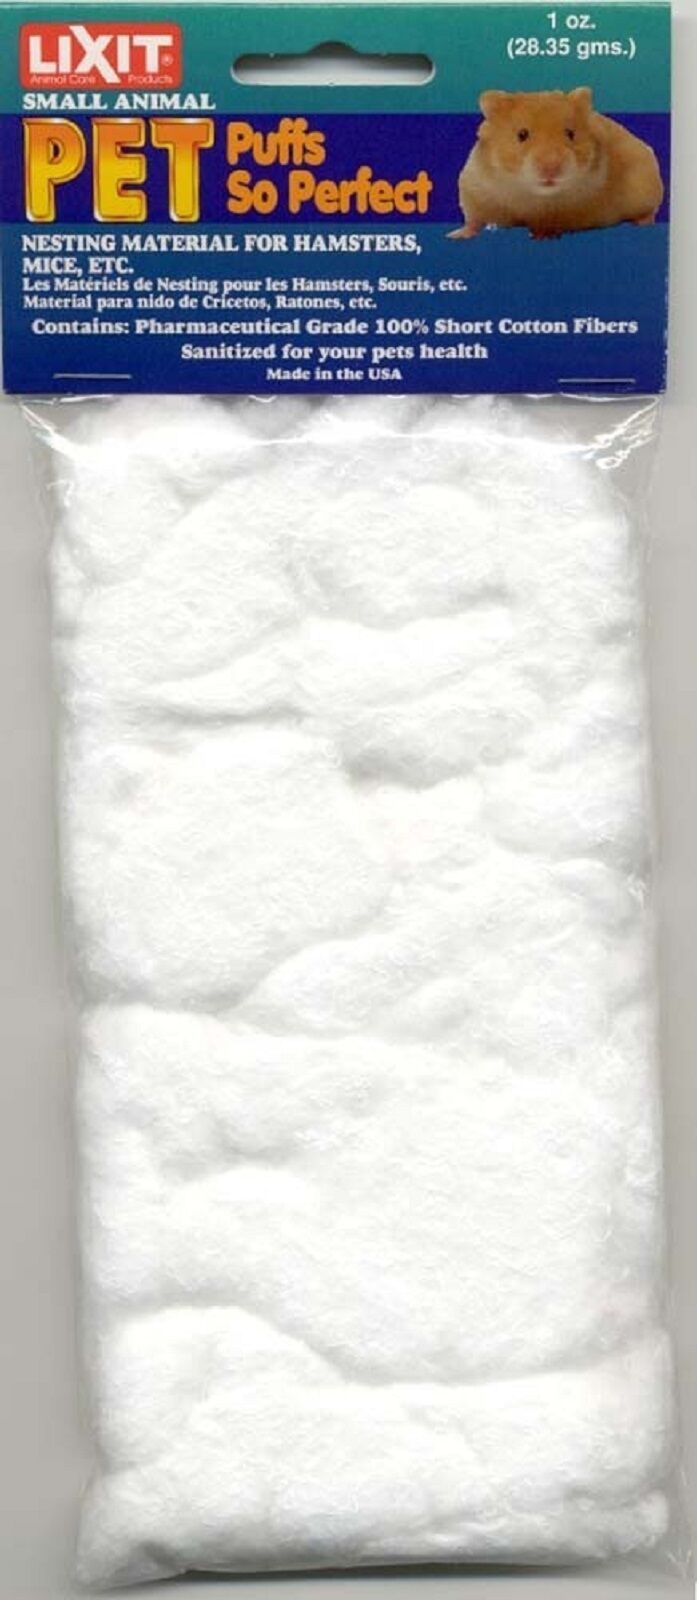 Lixit Pure Pet Puffs Cotton Nesting Material for Hamsters, Mice, Etc. 1oz